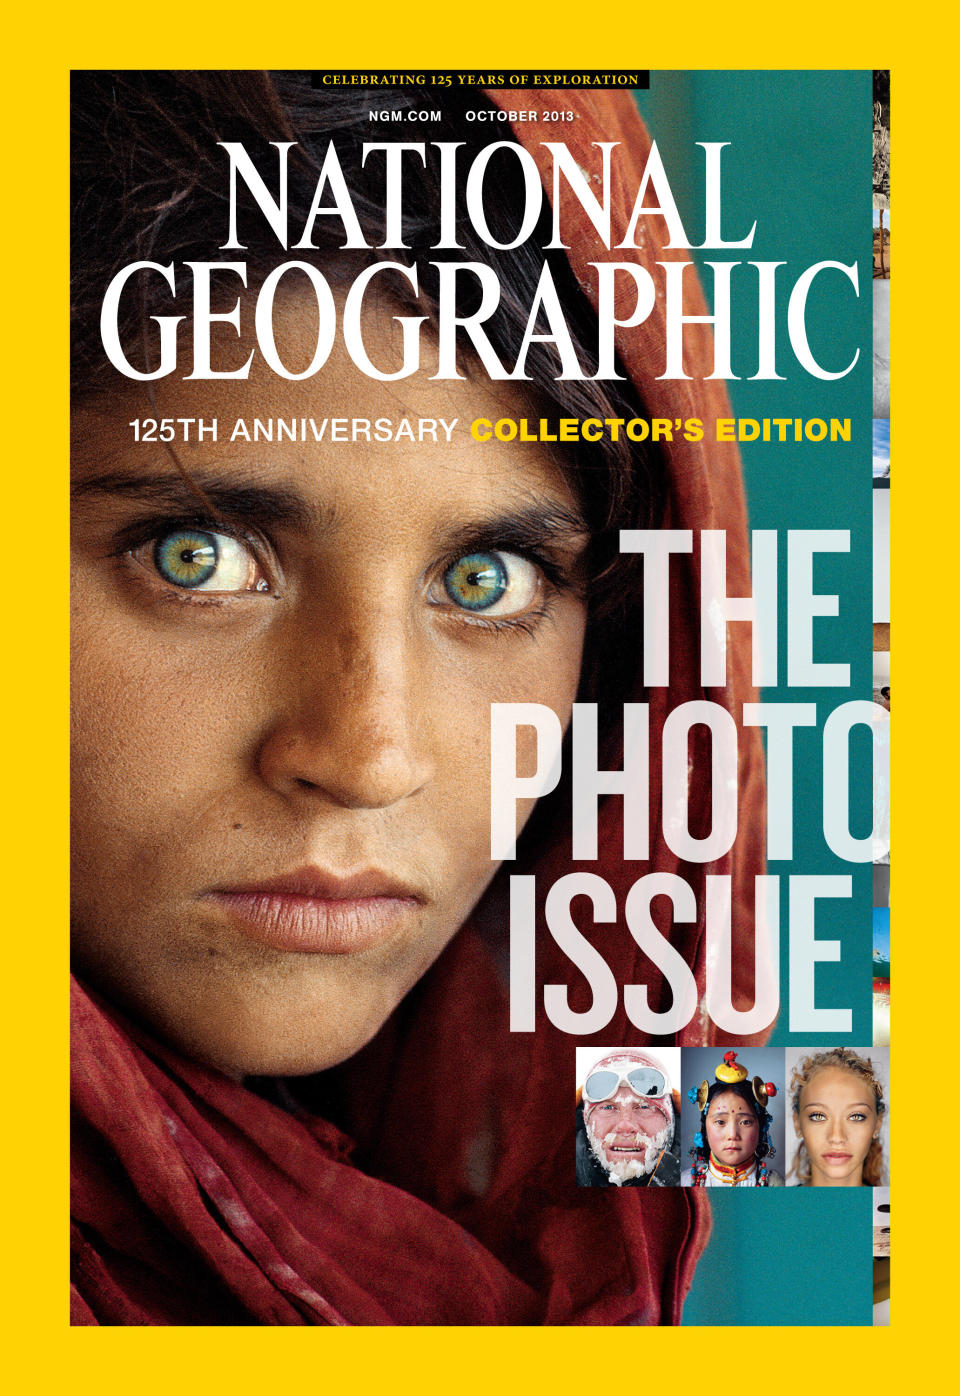 All images are from the October 125th anniversary issue of National Geographic magazine.